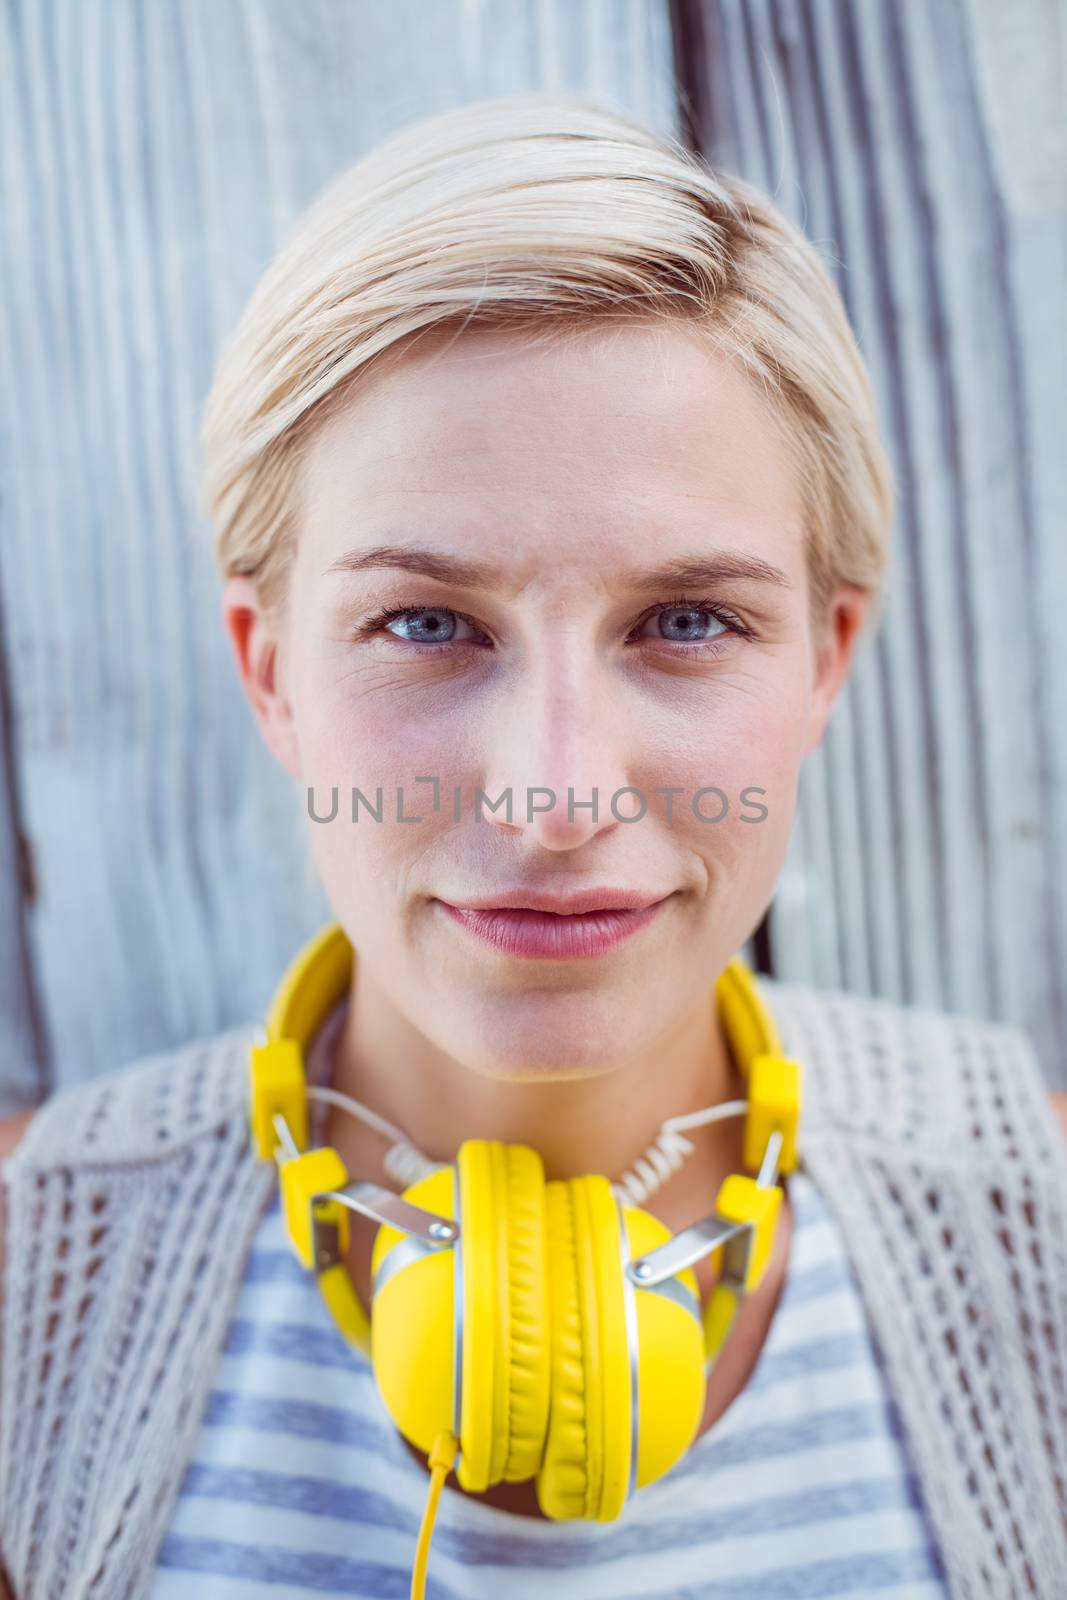 Pretty blonde woman wearing yellow headset on wooden background